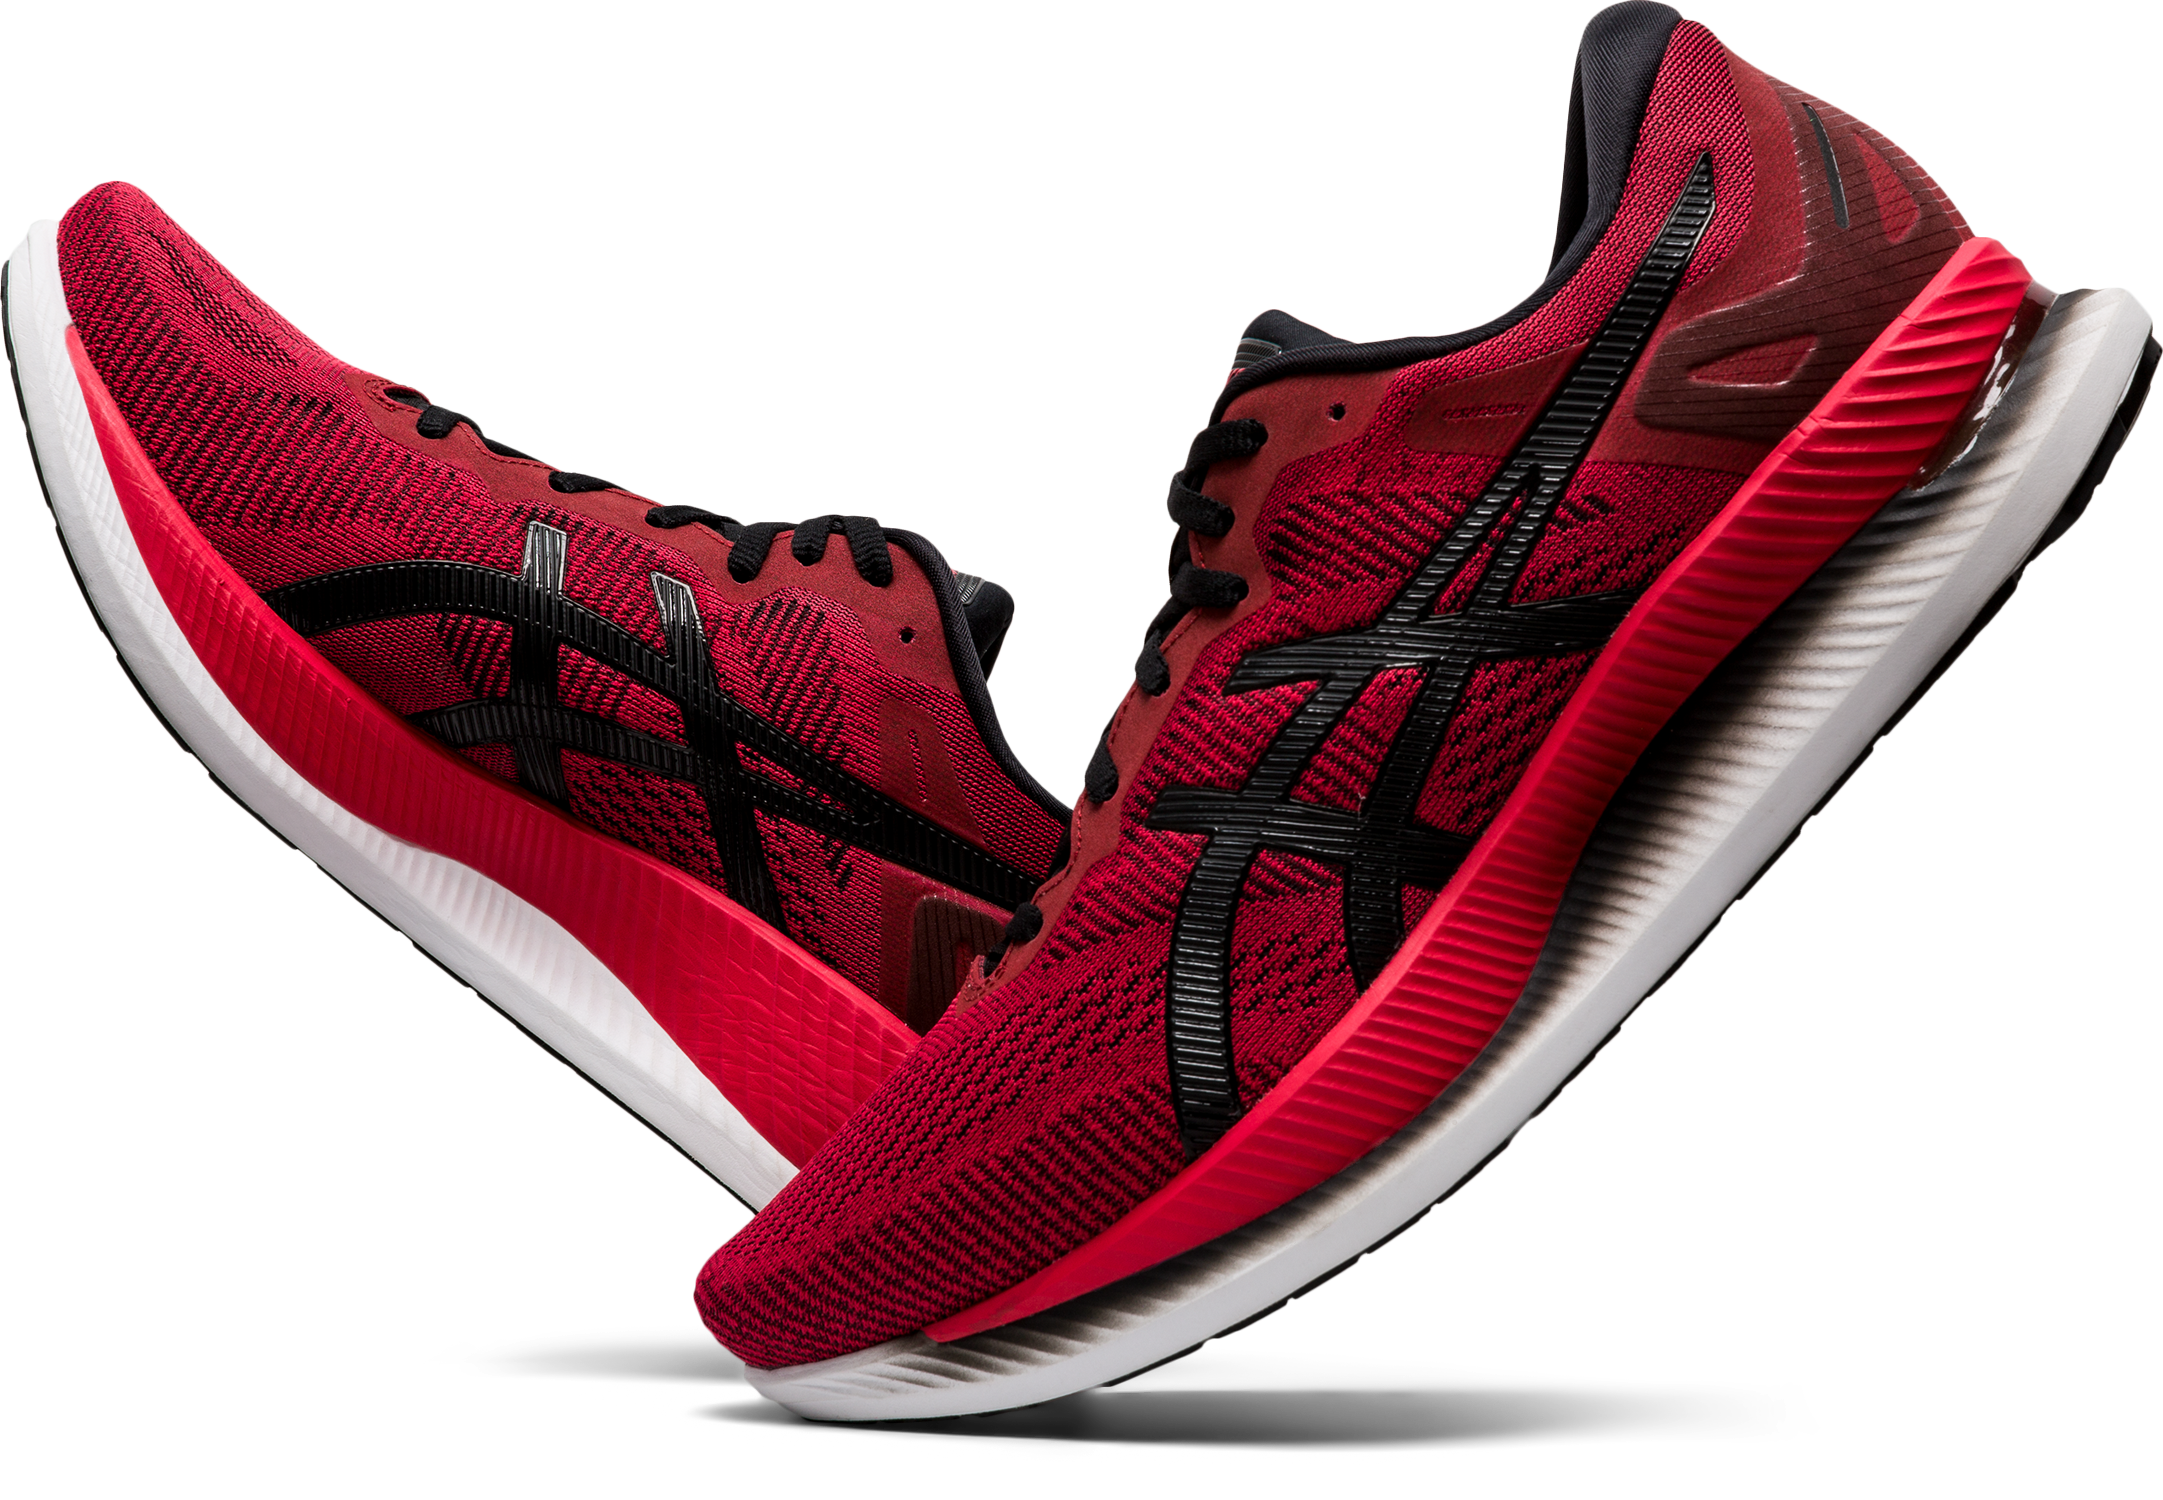 ASICS unveil new GlideRide running shoes